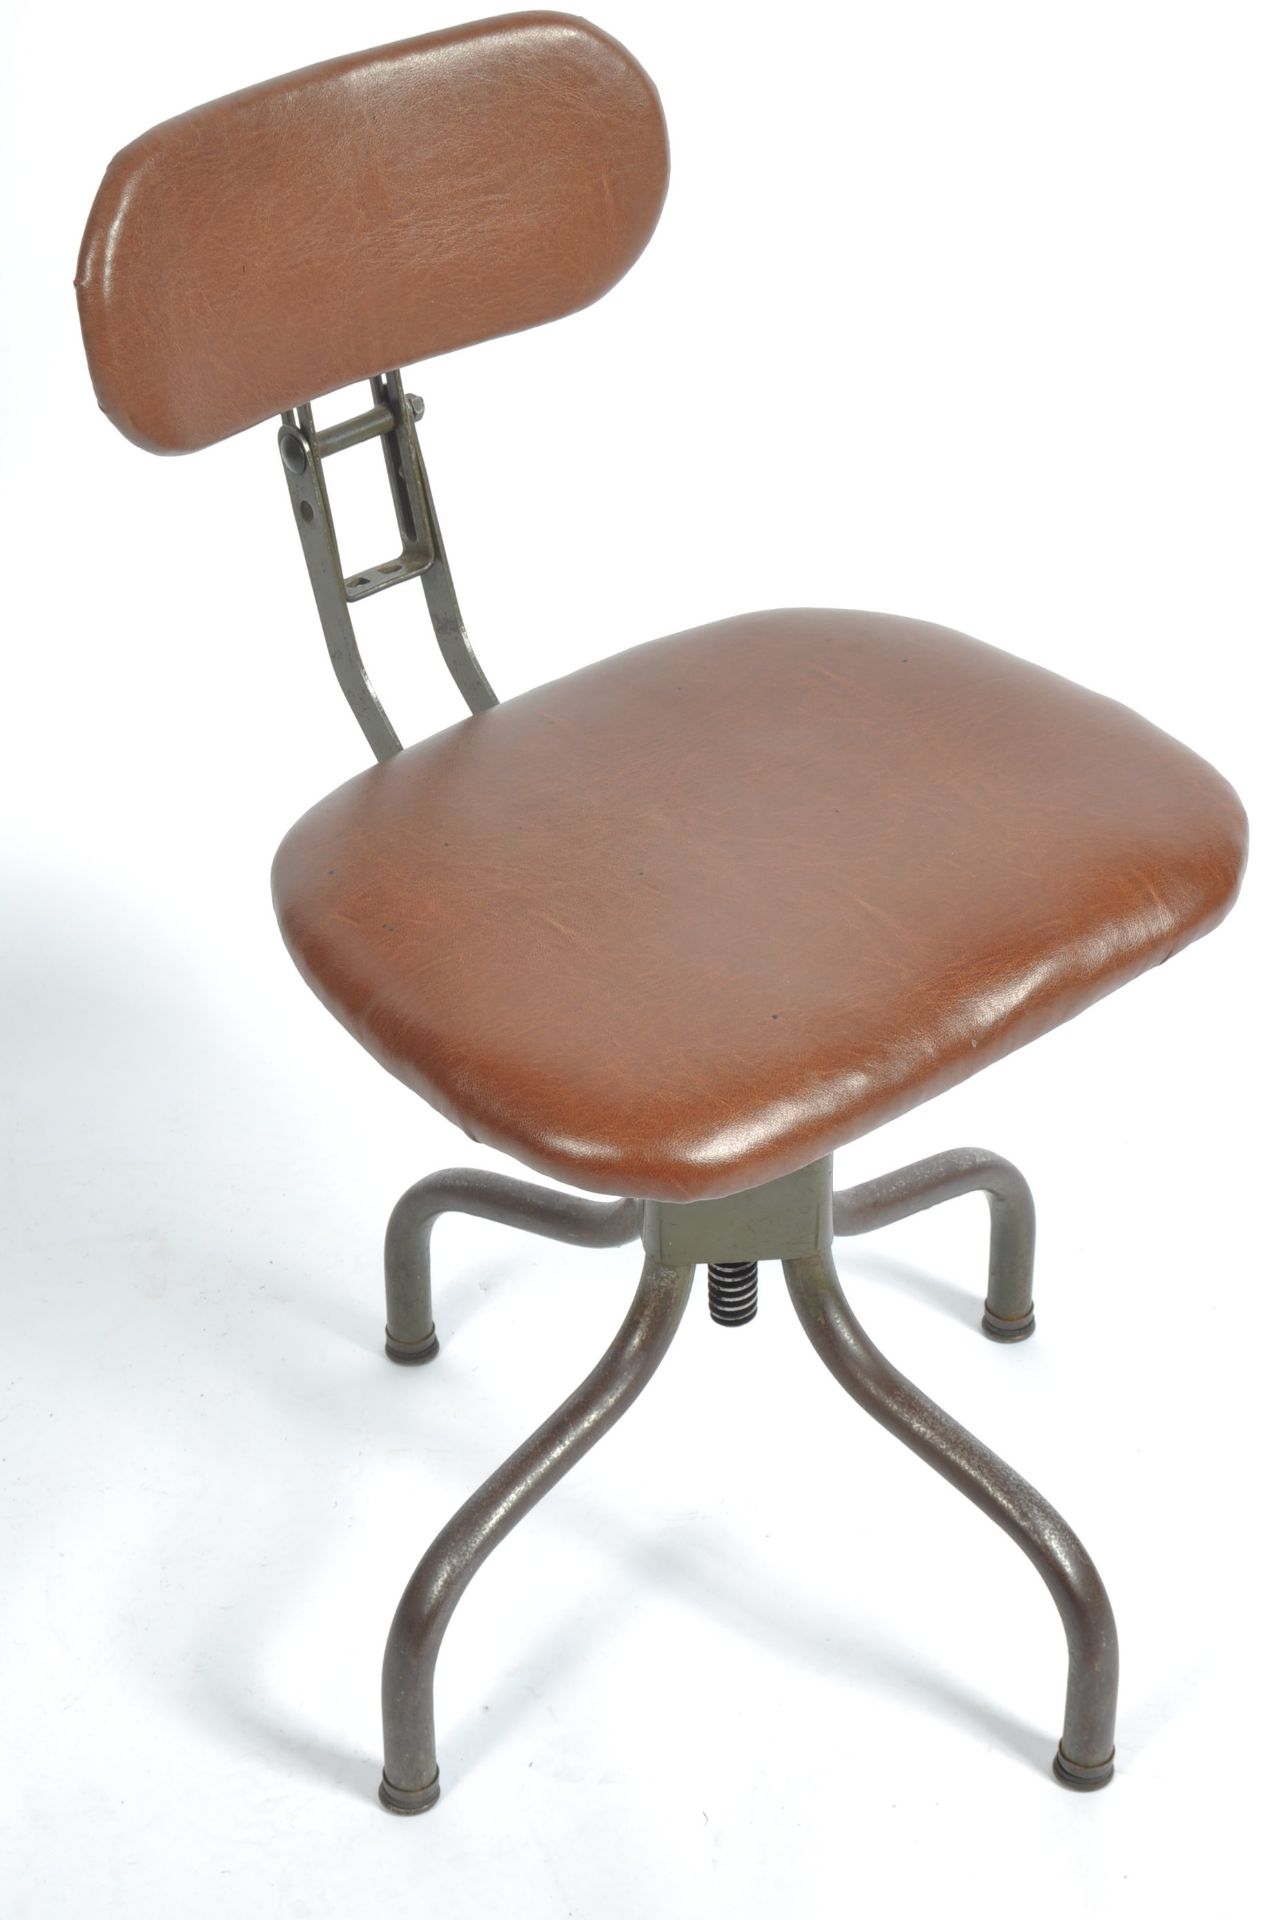 EVERTAUT - VINTAGE INDUSTRIAL MACHINISTS ADJUSTABLE CHAIR - Image 2 of 5